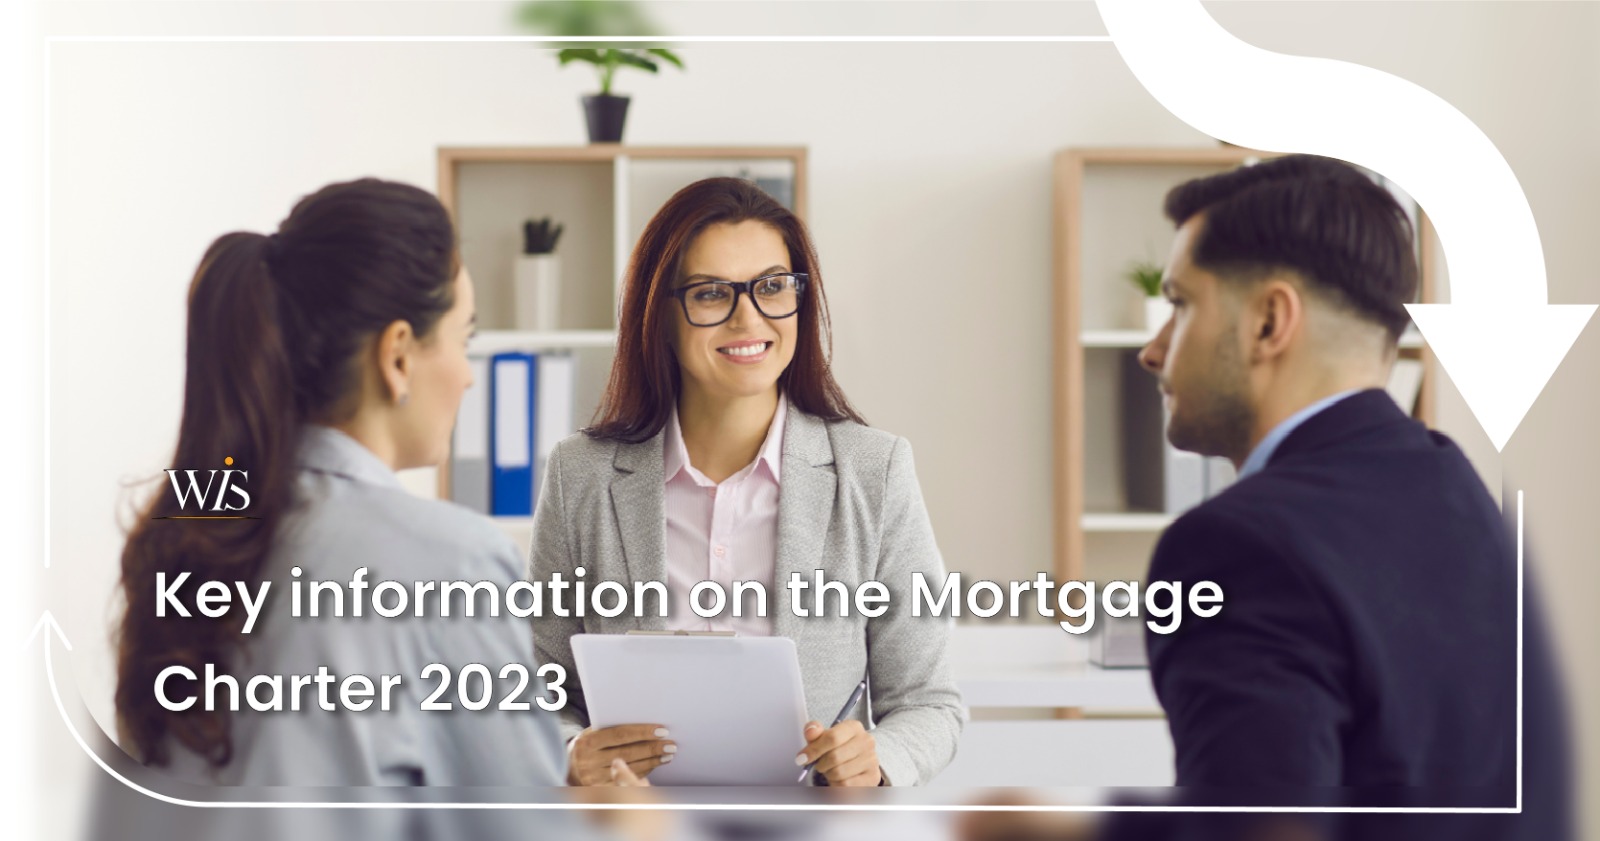 Key information on the mortgage charter 2023  image